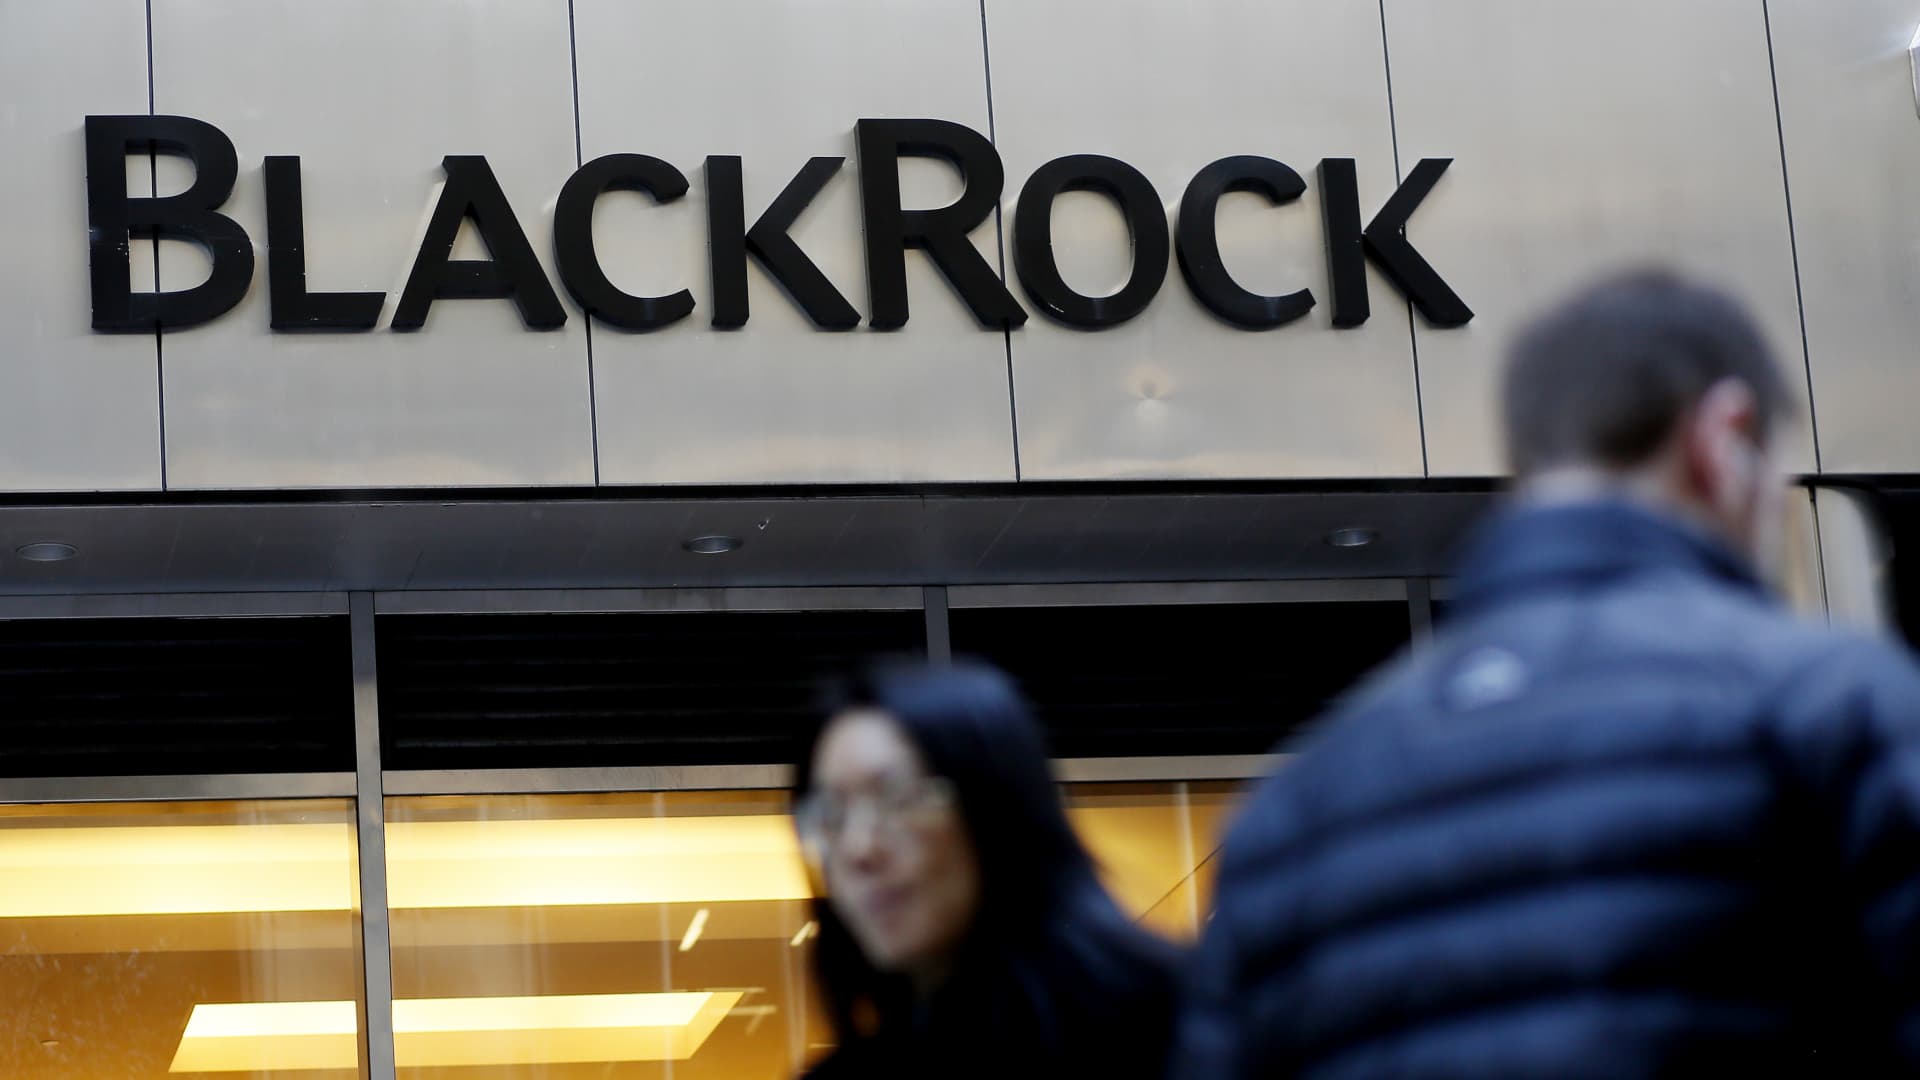 BlackRock returns to India, joining forces with Indian tycoon Mukesh Ambani's financial arm